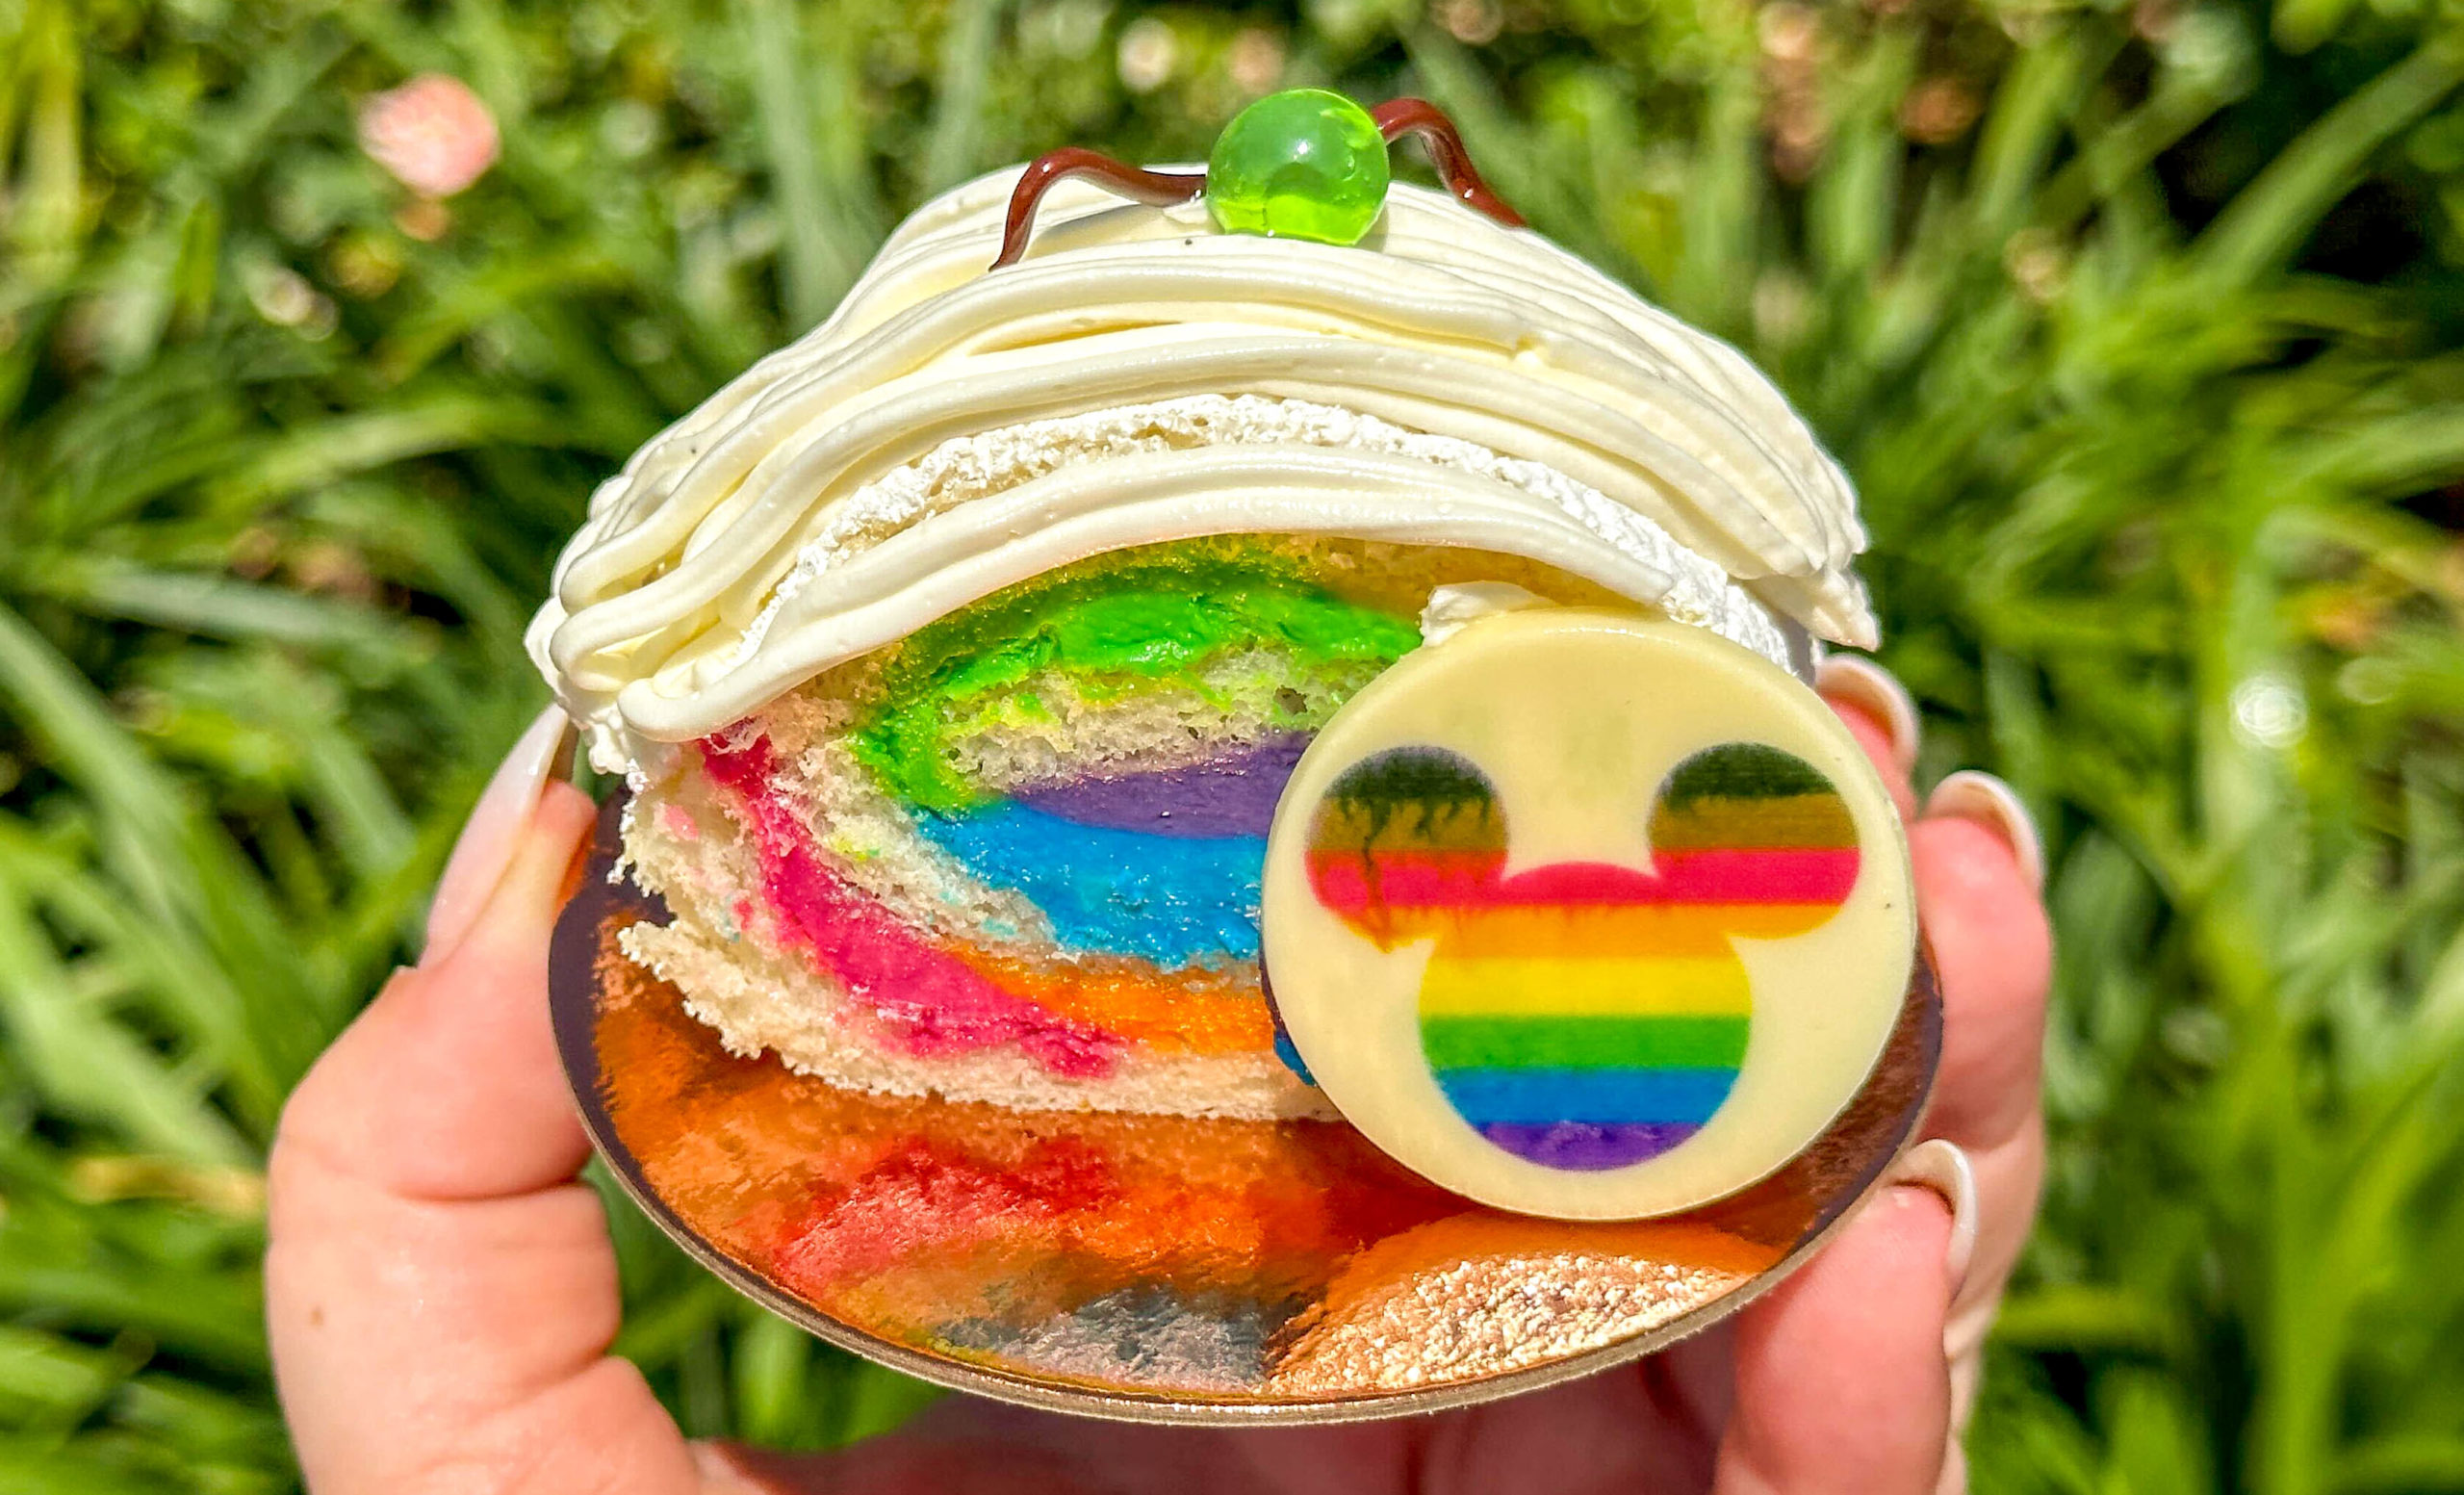 Pride Roulade